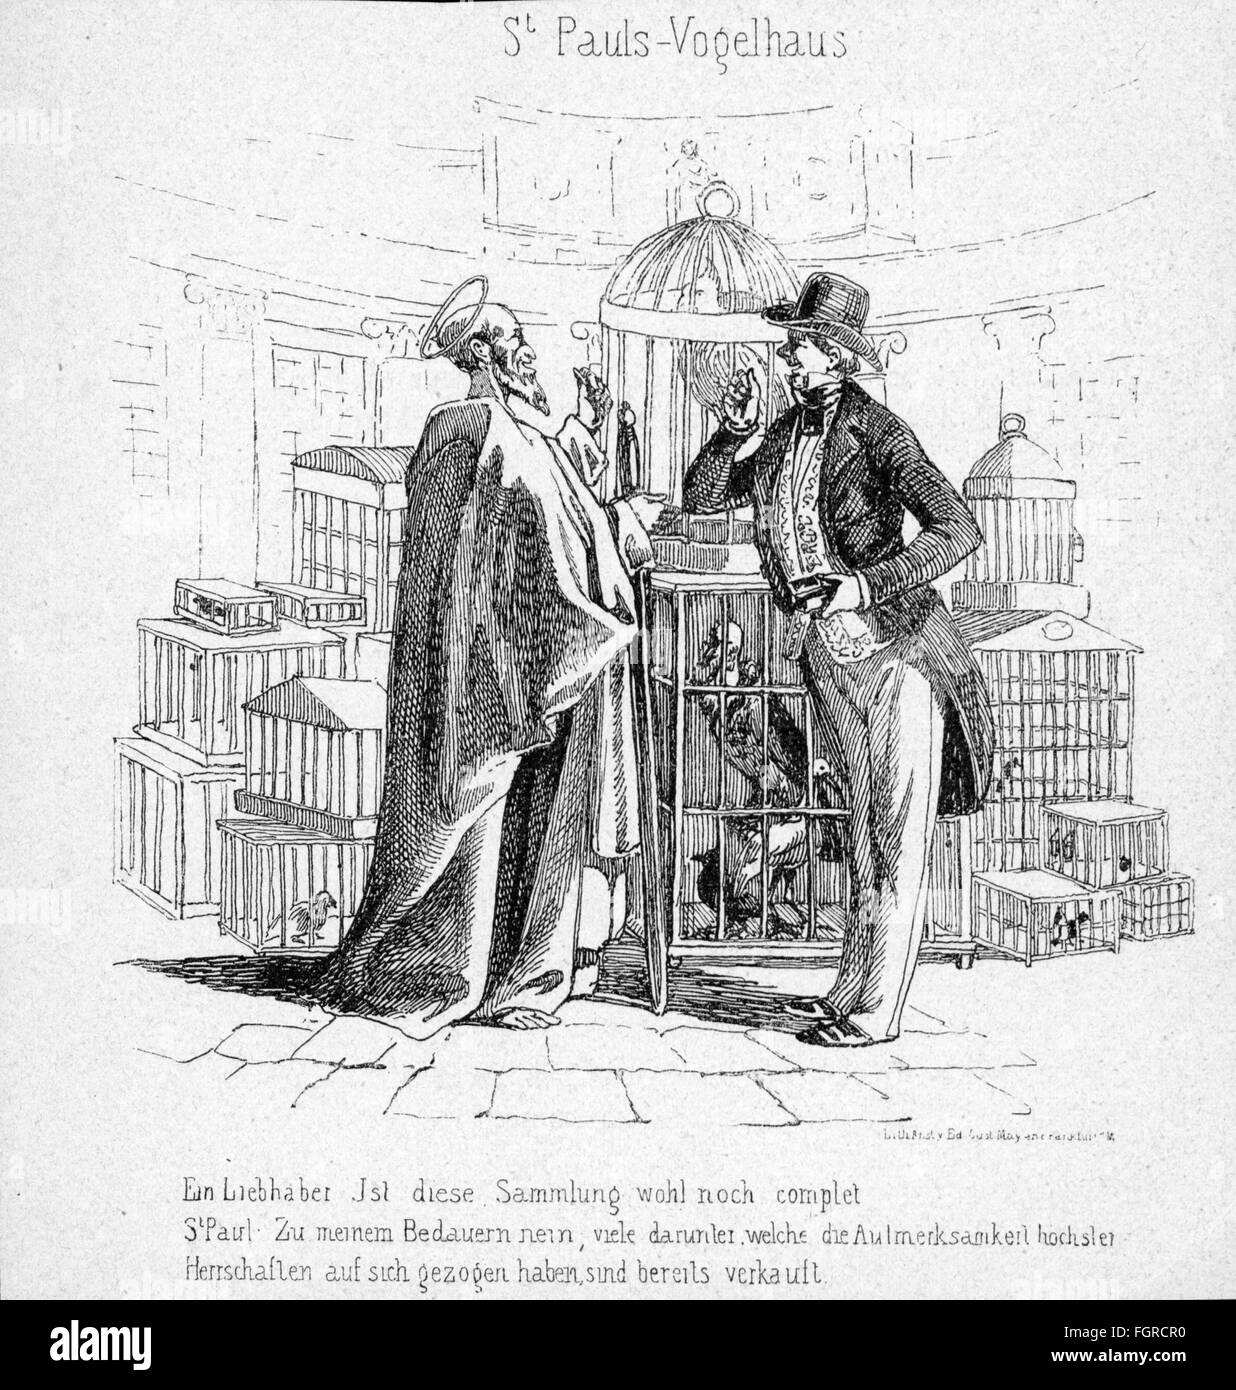 Revolution 1848 - 1849, Germany, caricature on the National Assembly, 'Saint Paul's Aviary', contemporary wood engraving, Additional-Rights-Clearences-Not Available Stock Photo